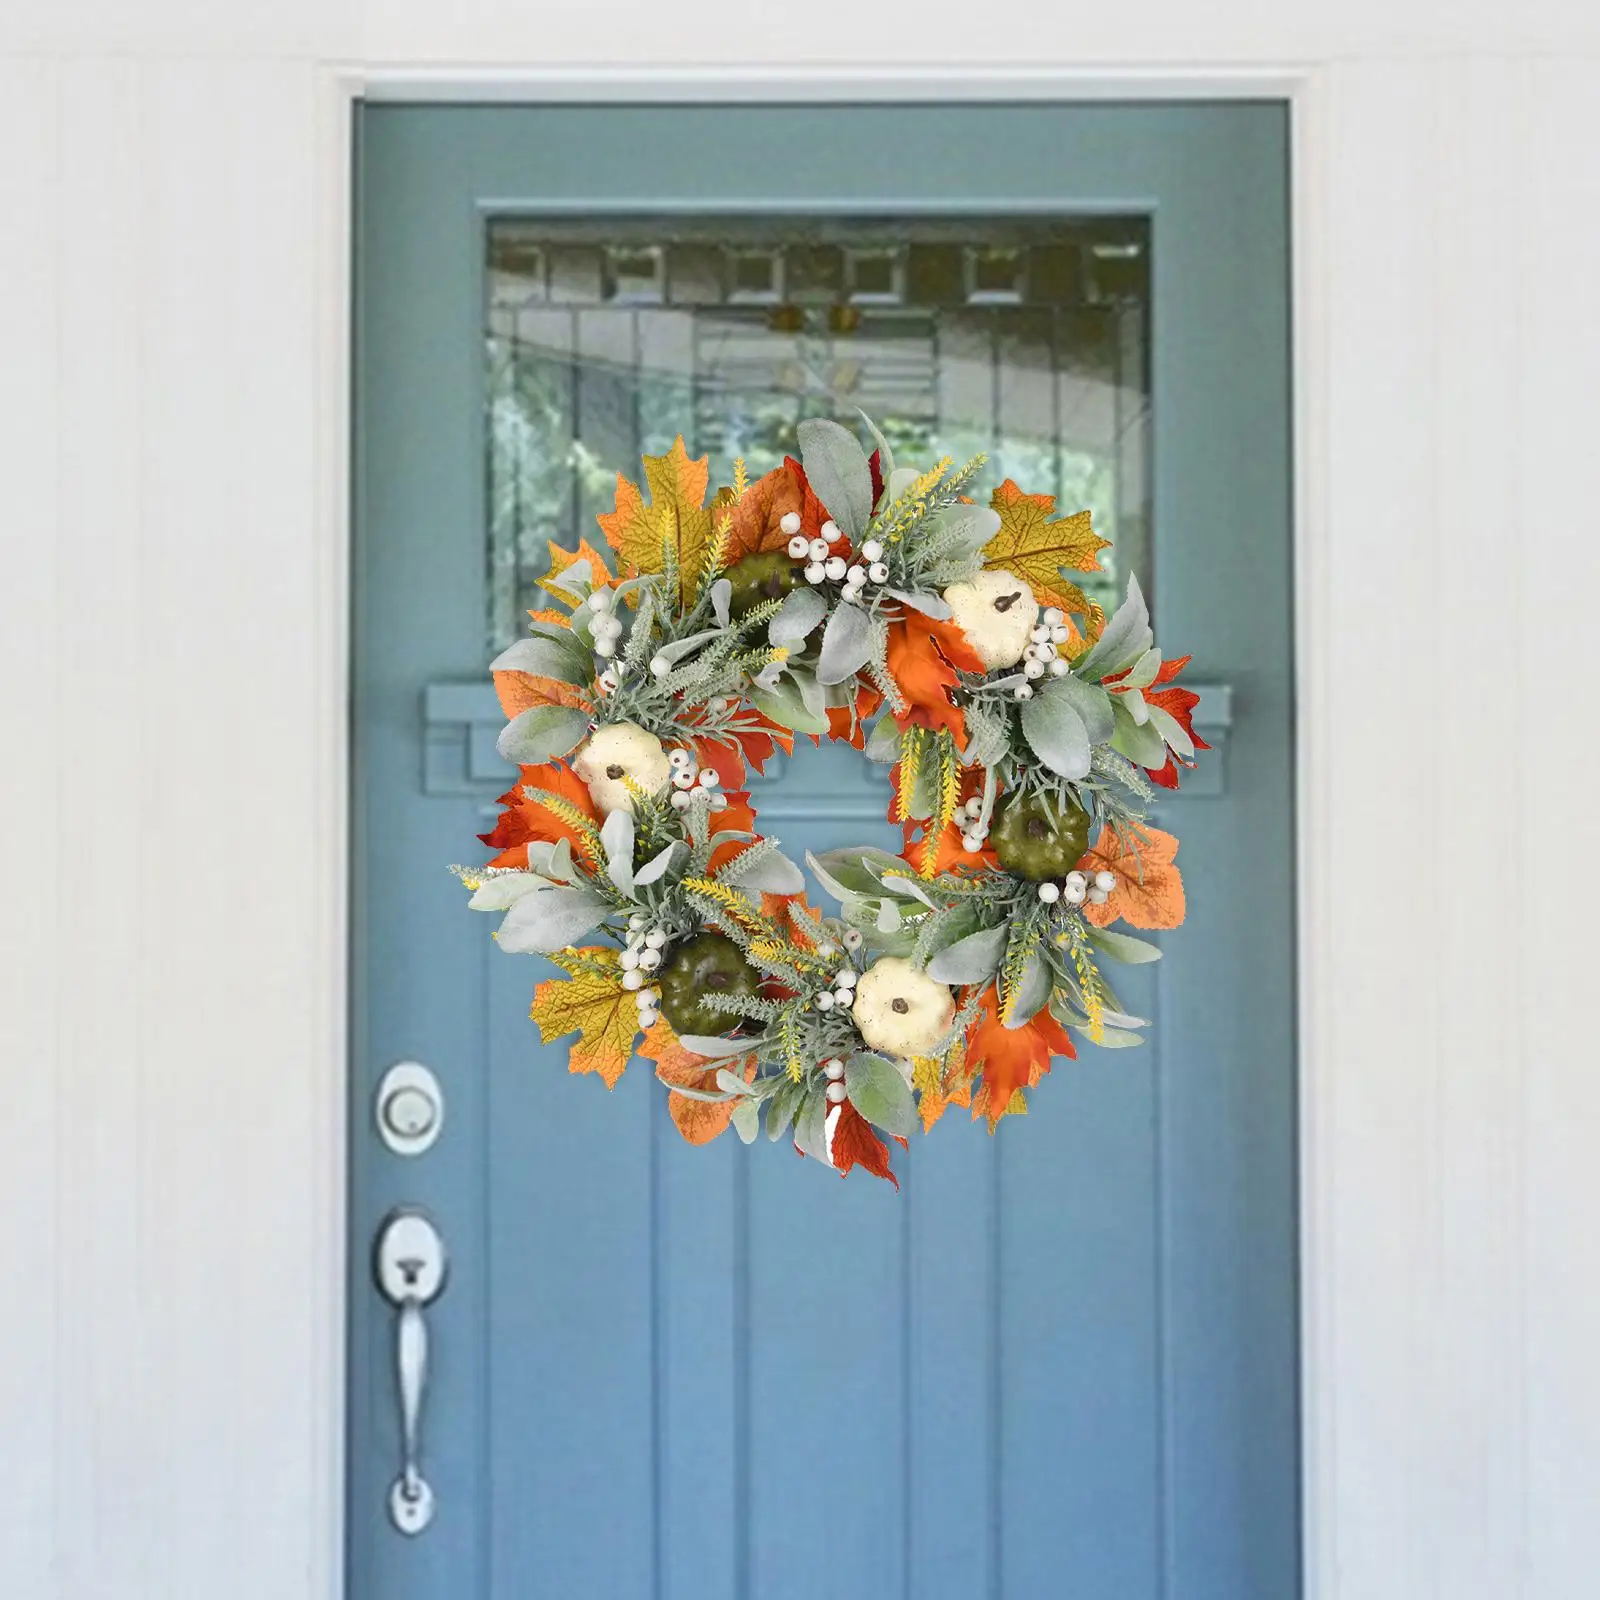 Autumn Wreath 17.72`` Ornament Garland with Pumpkin Leaves Harvest Wreath for Holiday Porch Indoor Outdoor Garden Decor